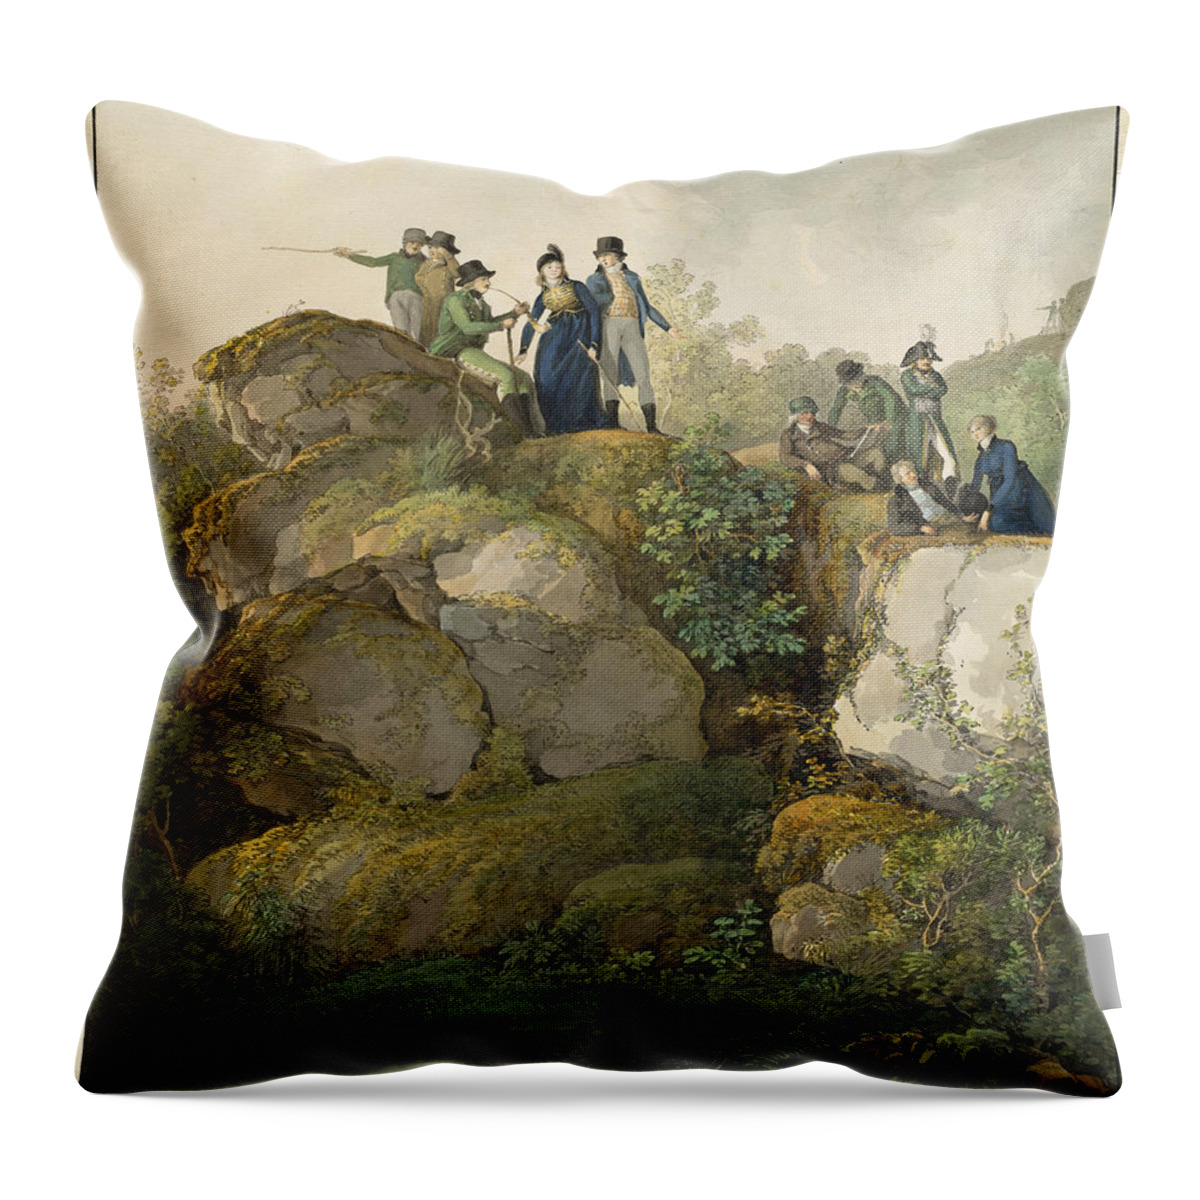 Johann Georg Von Dillis Throw Pillow featuring the drawing A Royal Party Admiring the Sunset atop the Hesselberg Mountain by Johann Georg von Dillis